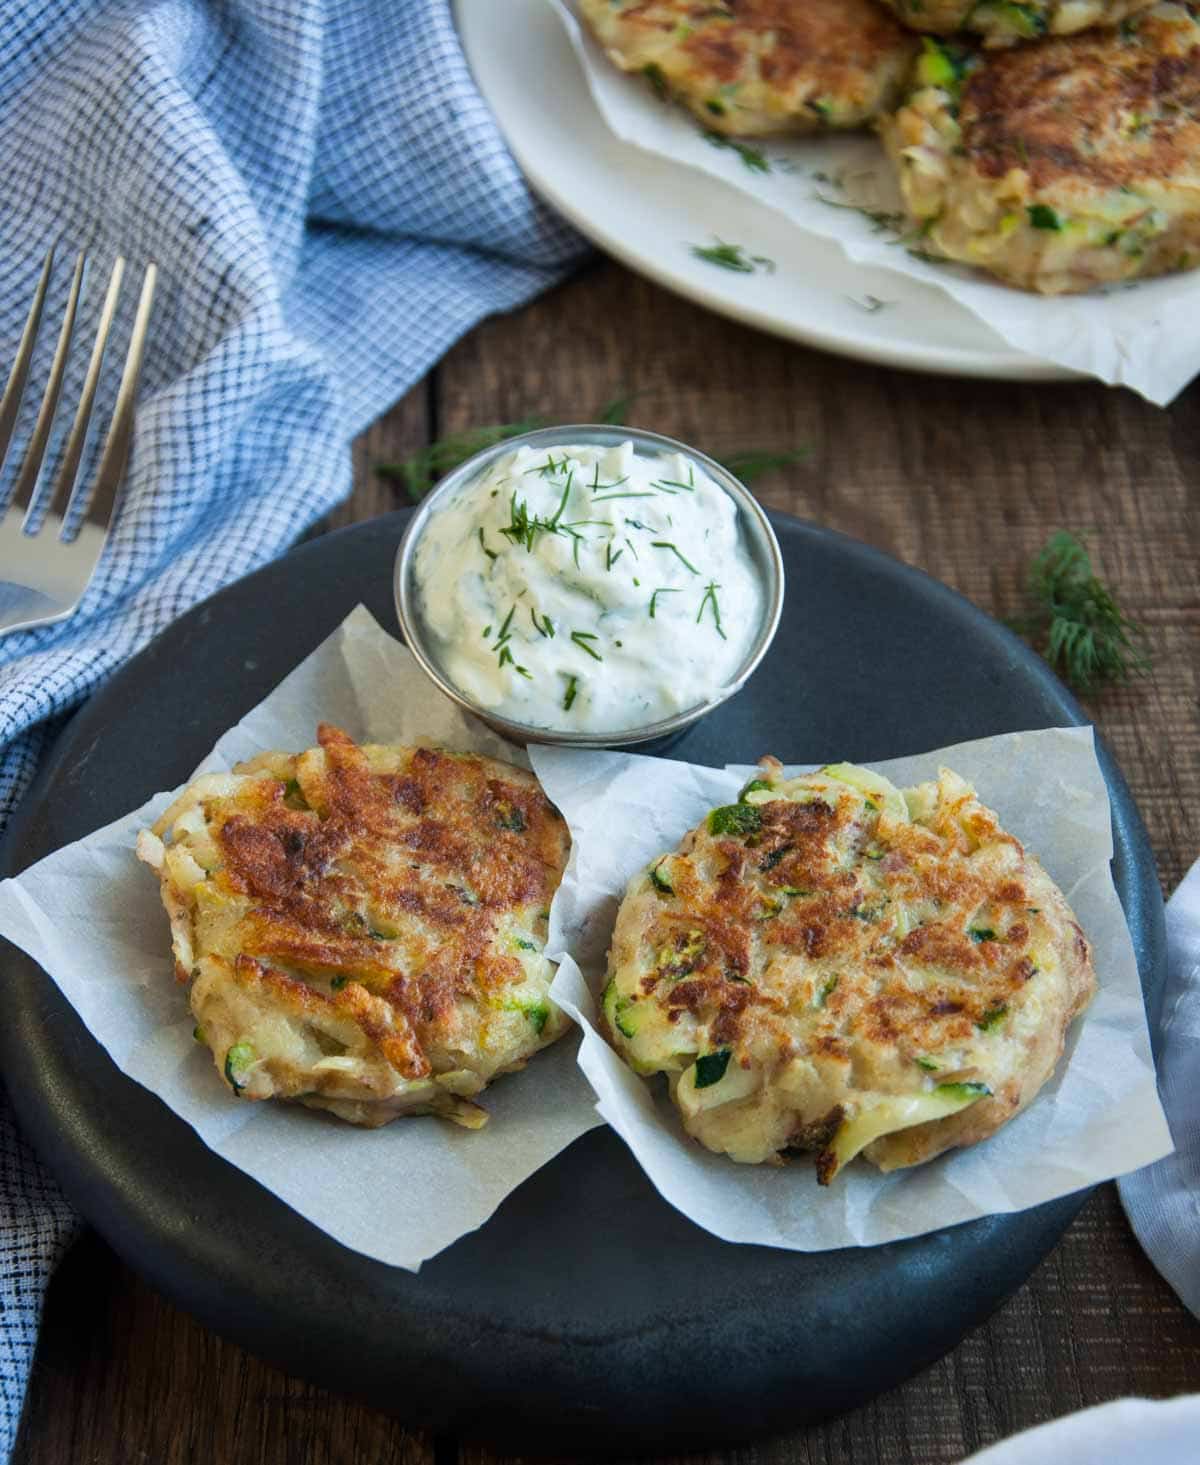 Crispy on the outside and soft on the inside, these zucchini cakes are a tasty way to use that garden produce. The tangy yogurt dill dipping sauce makes these a perfect appetizer.